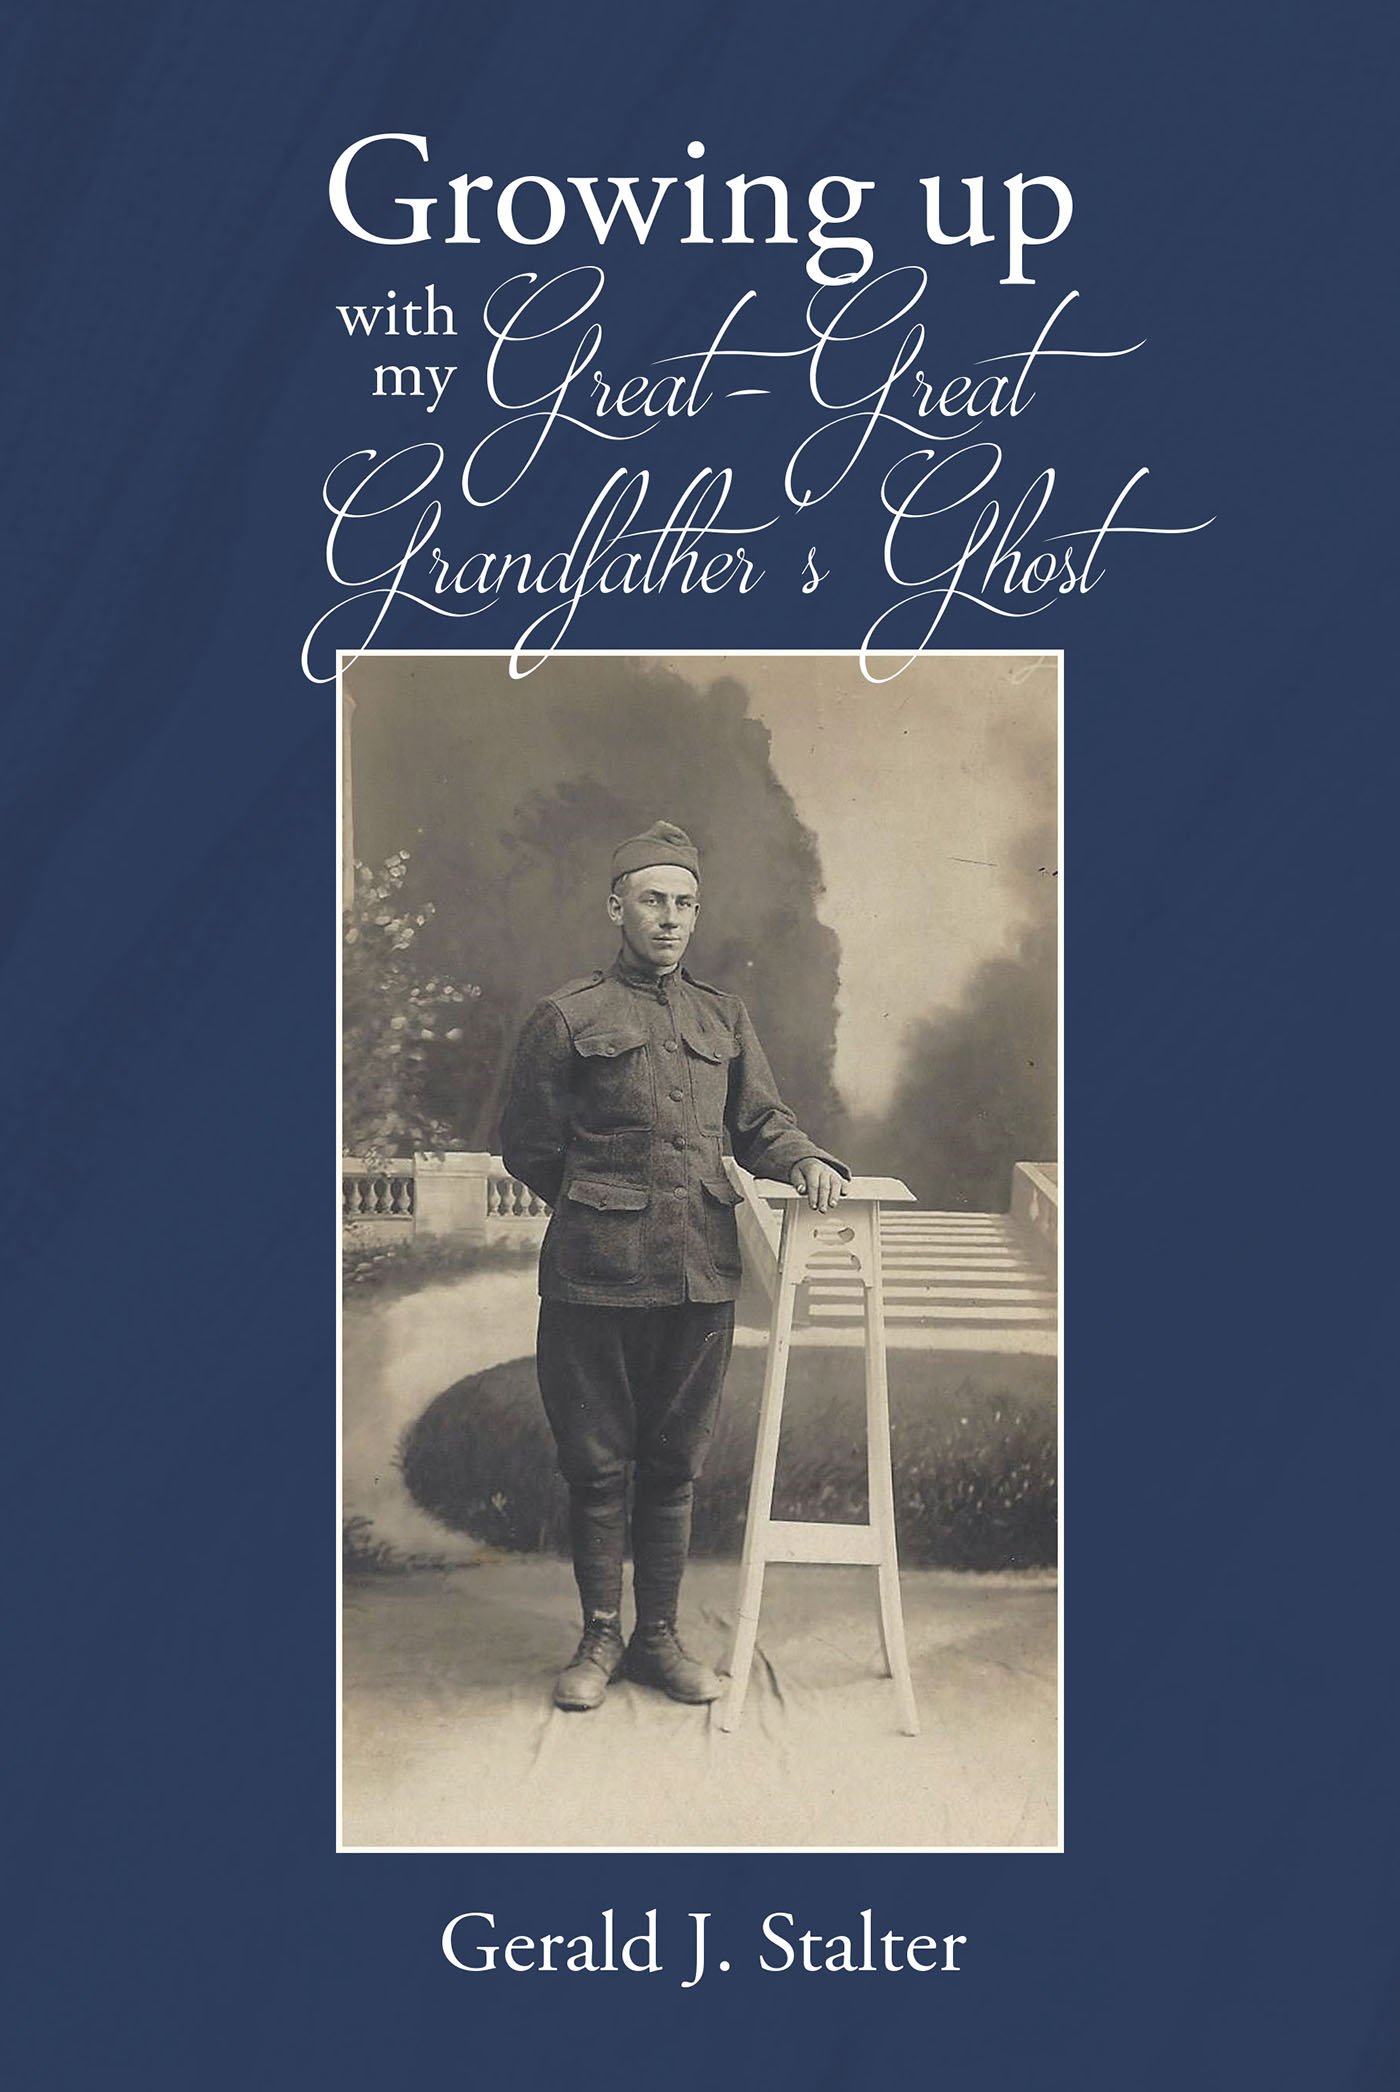 Author Gerald J Stalter’s New Book, "Growing Up with My Great-Great Grandfather's Ghost," Follows the Author's Journey to Connect with and Understand His Family's Past